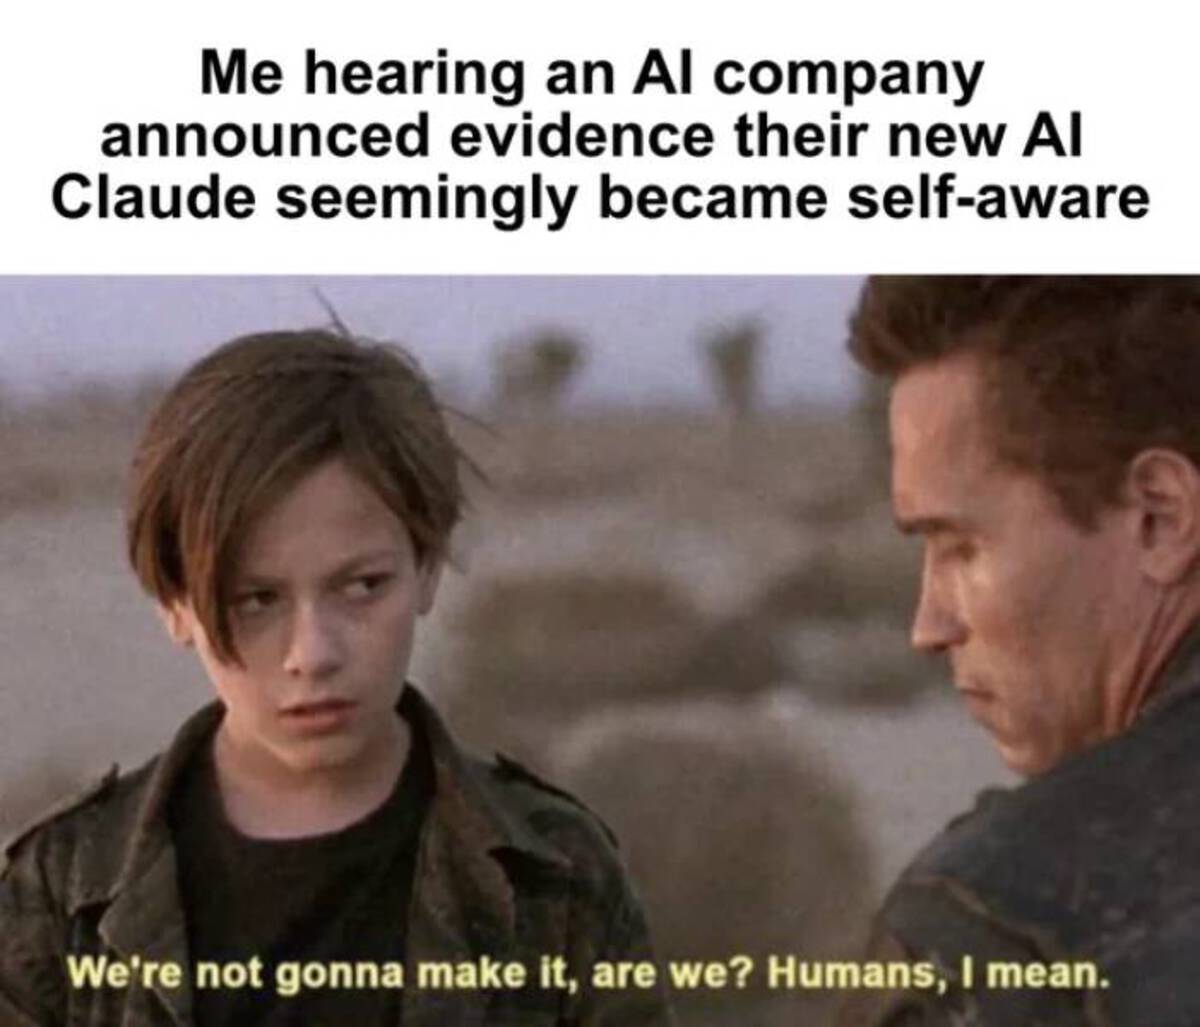 photo caption - Me hearing an Al company announced evidence their new Al Claude seemingly became selfaware We're not gonna make it, are we? Humans, I mean.